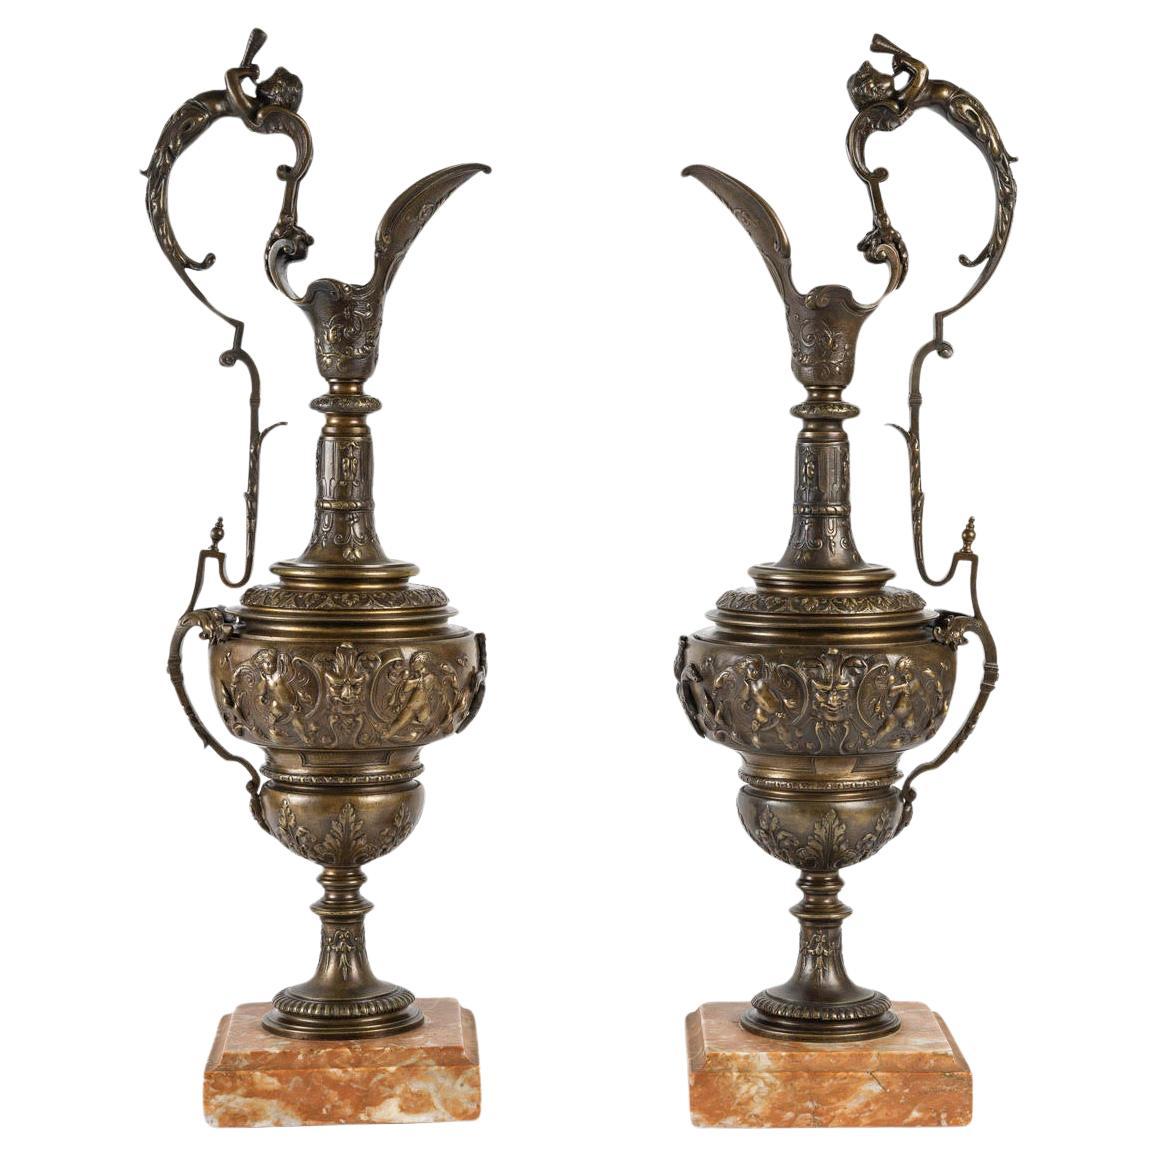 Pair of Empire Style Bronze Ewers, Late 19th or Early 20th Century.